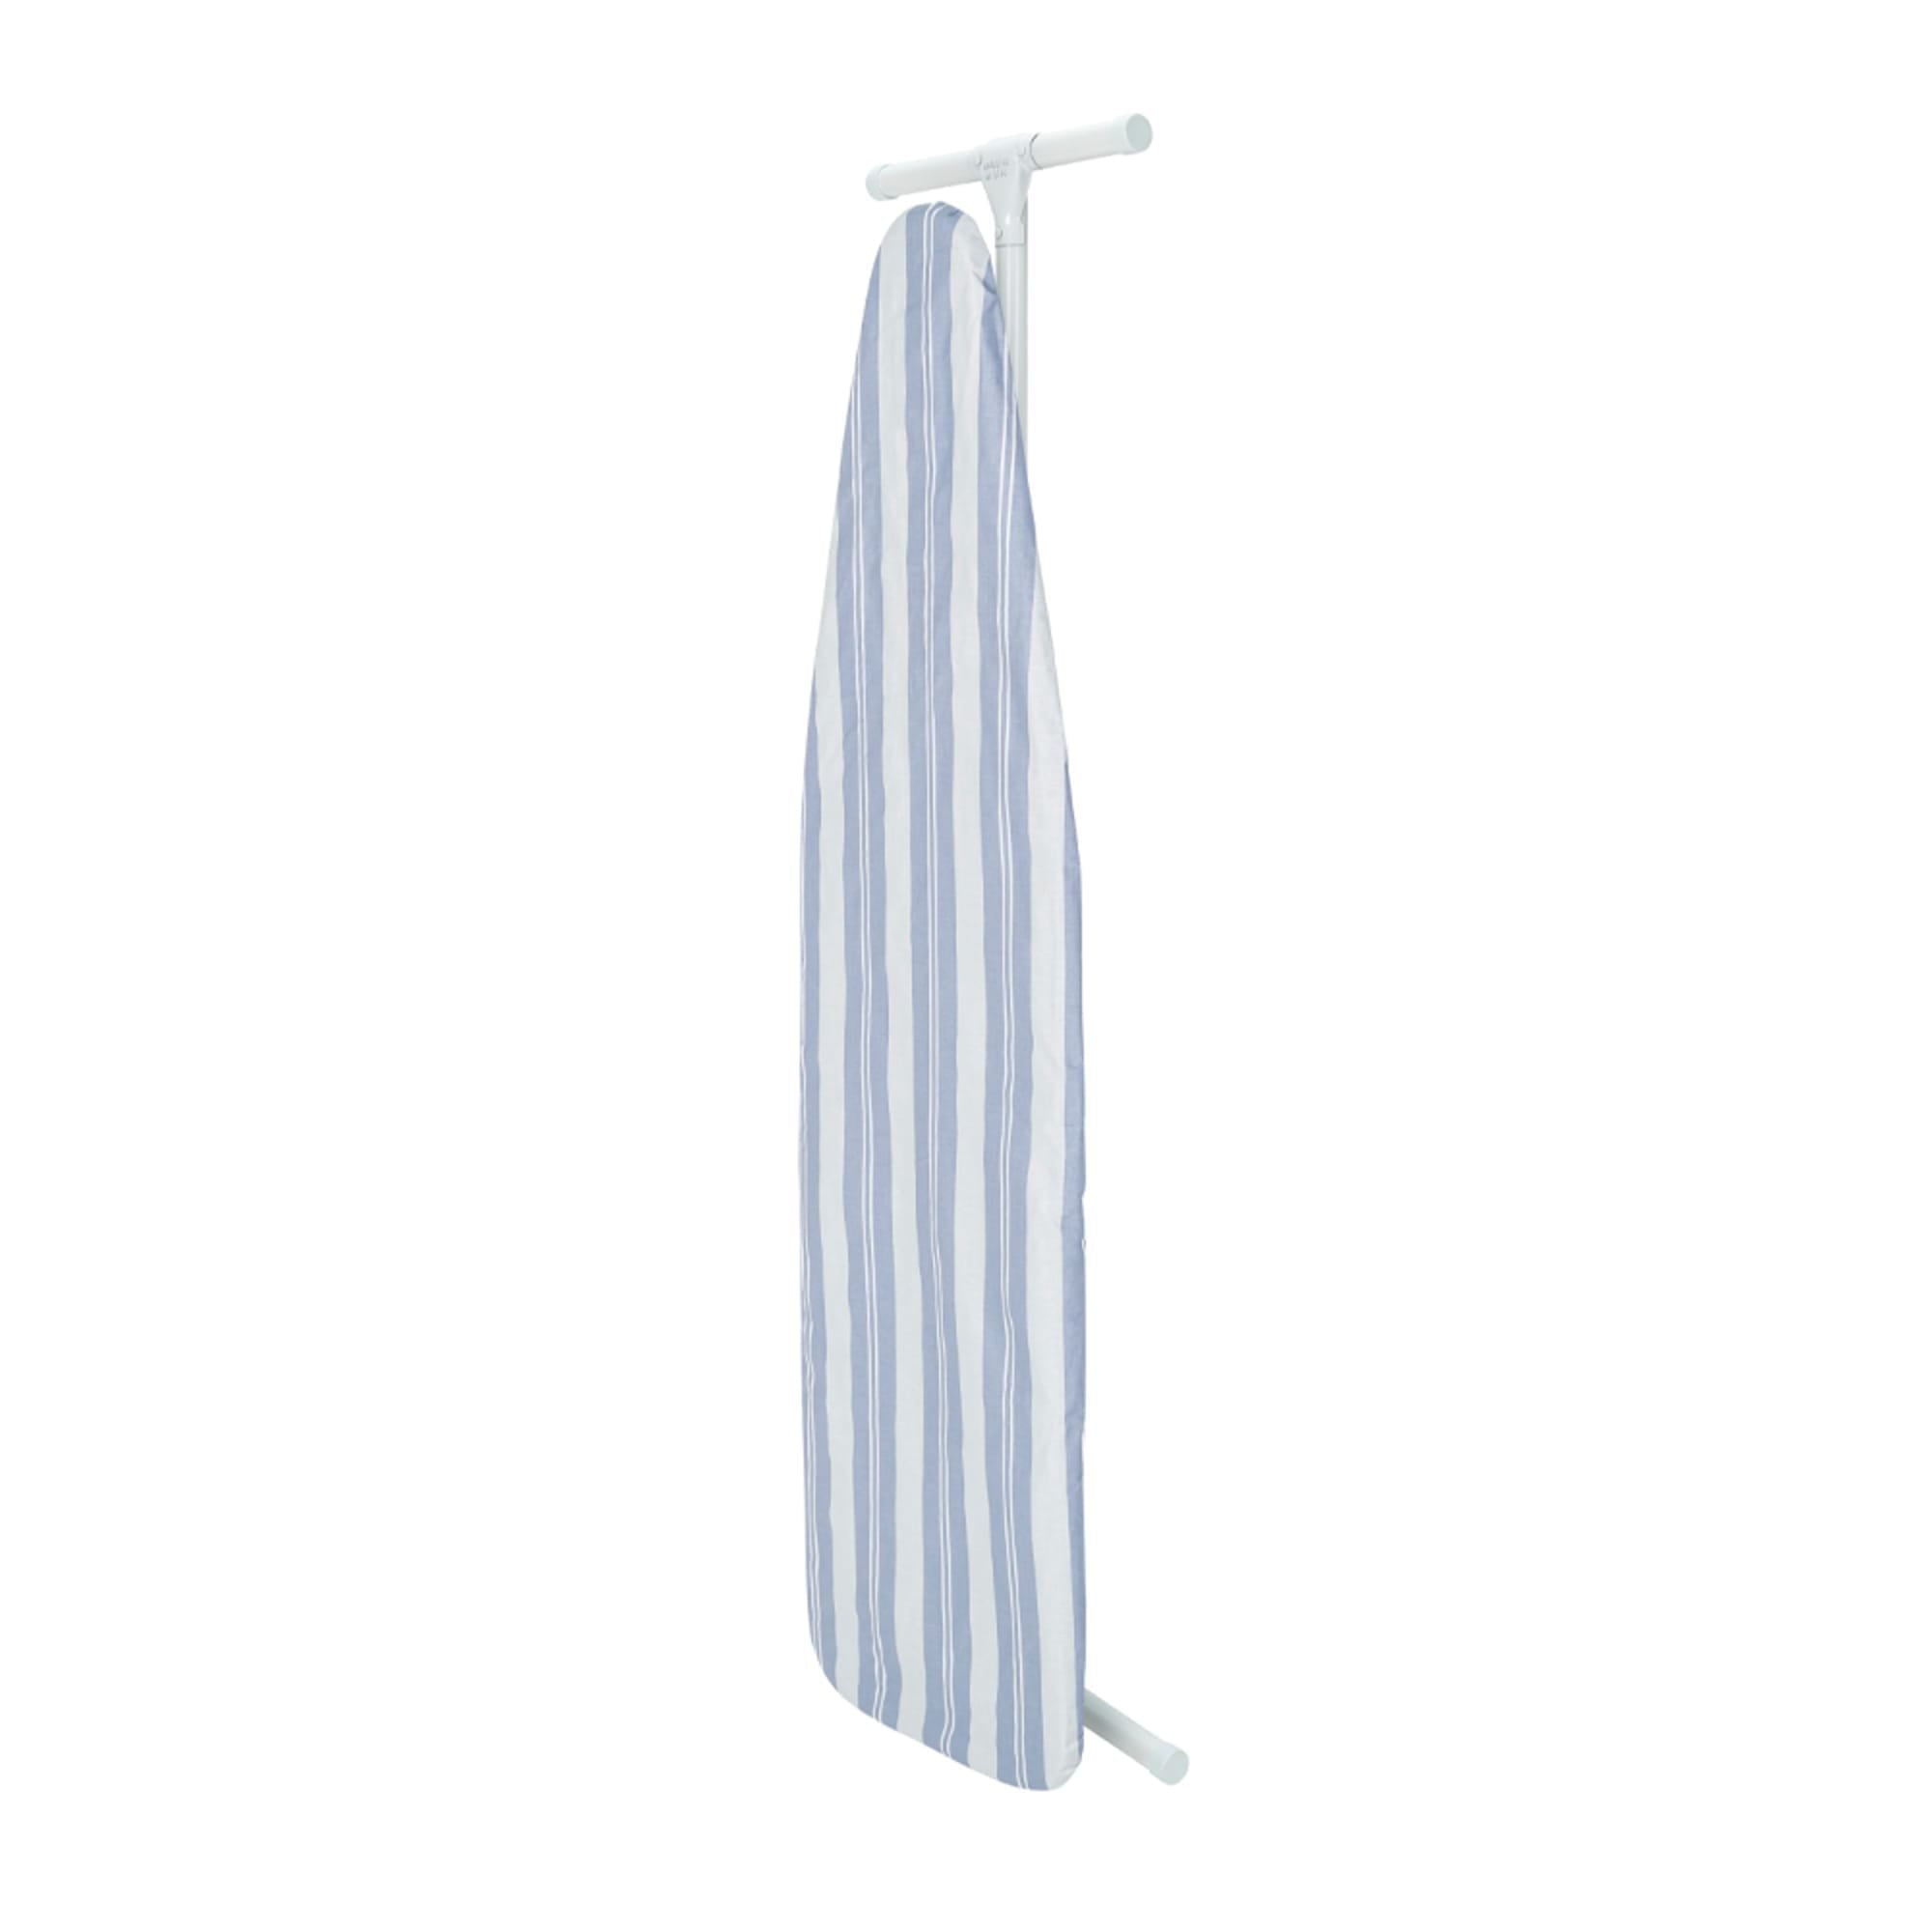 Seymour Home Products Adjustable Height, T-Leg Ironing Board With Perforated Top, Blue Stripe (4 Pack) $25.00 EACH, CASE PACK OF 4